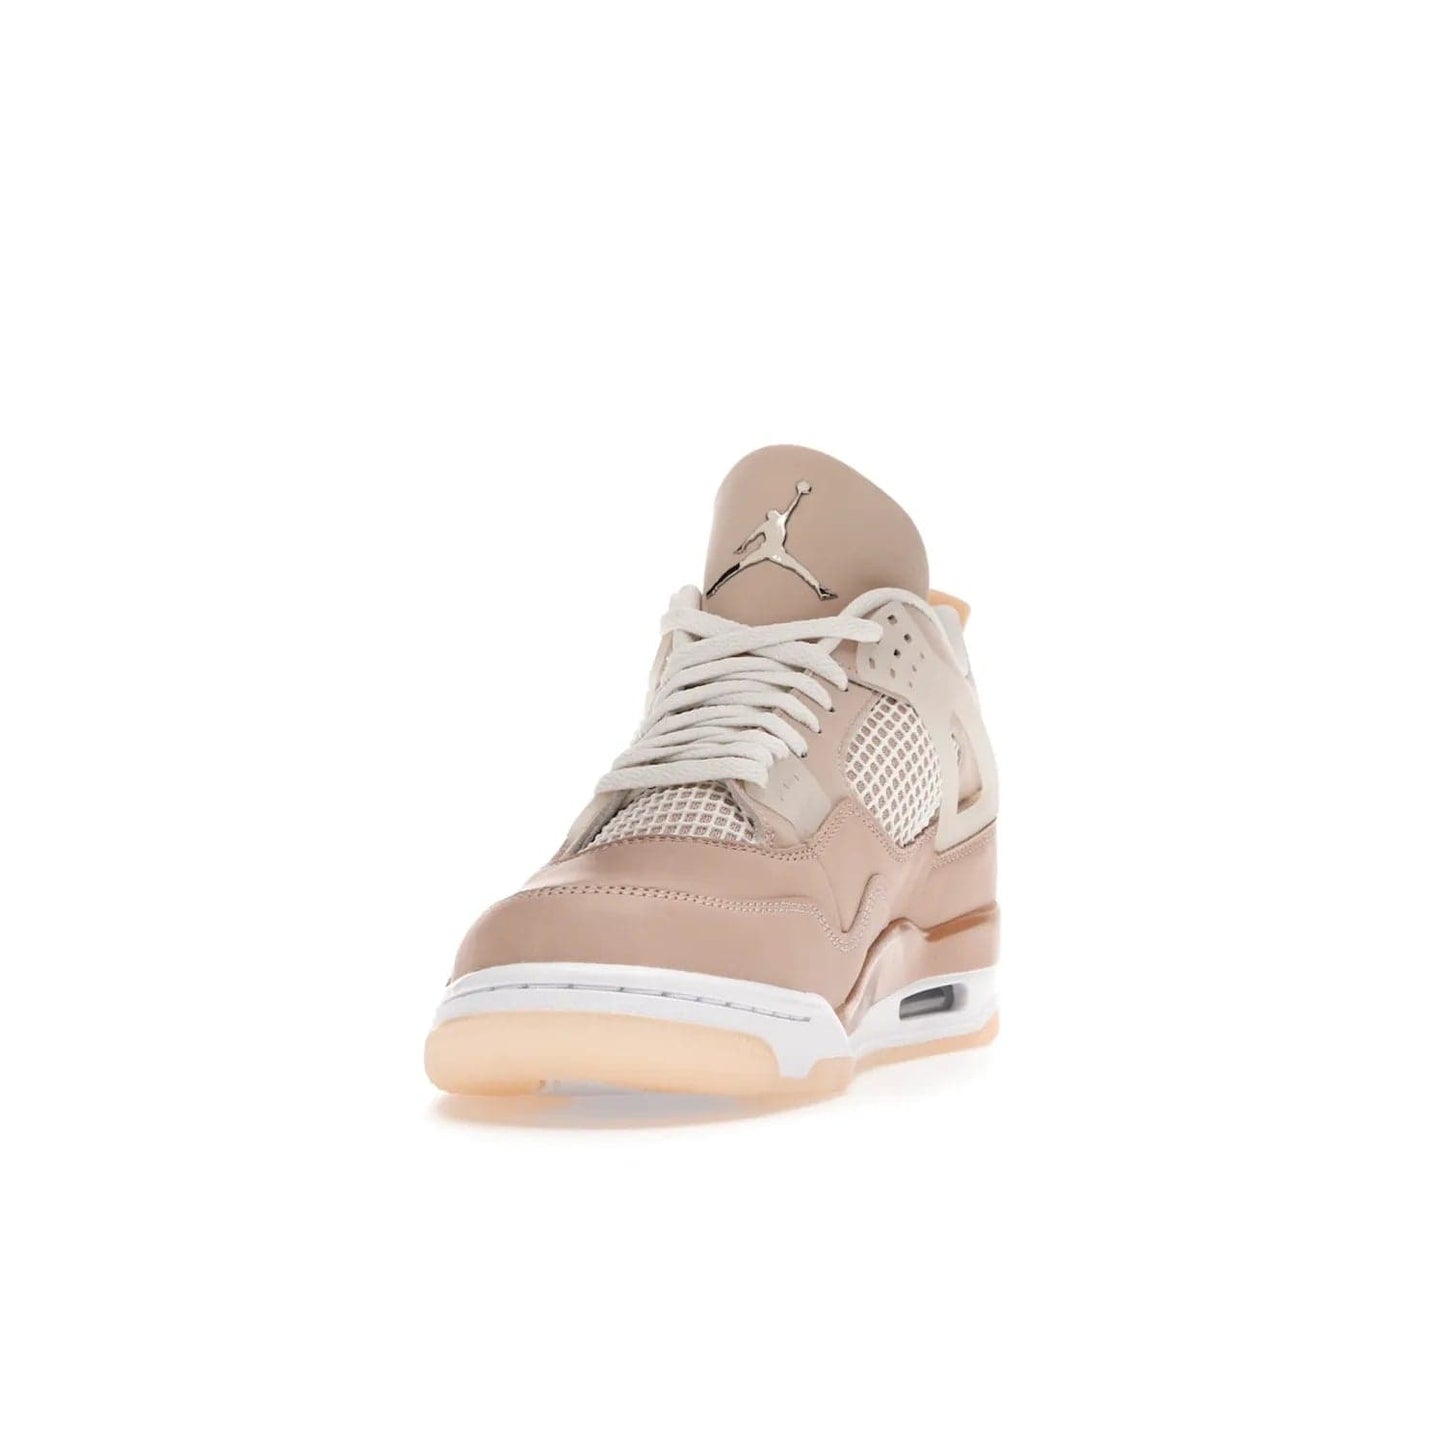 Jordan 4 Retro Shimmer (Women's) - Image 12 - Only at www.BallersClubKickz.com - Air Jordan 4 Shimmer (W): A women's-exclusive design with a buttery beige upper and Silver/Orange Bronze details. Durabuck and metallic Jumpman branding elevate the iconic silhouette. Shop now.